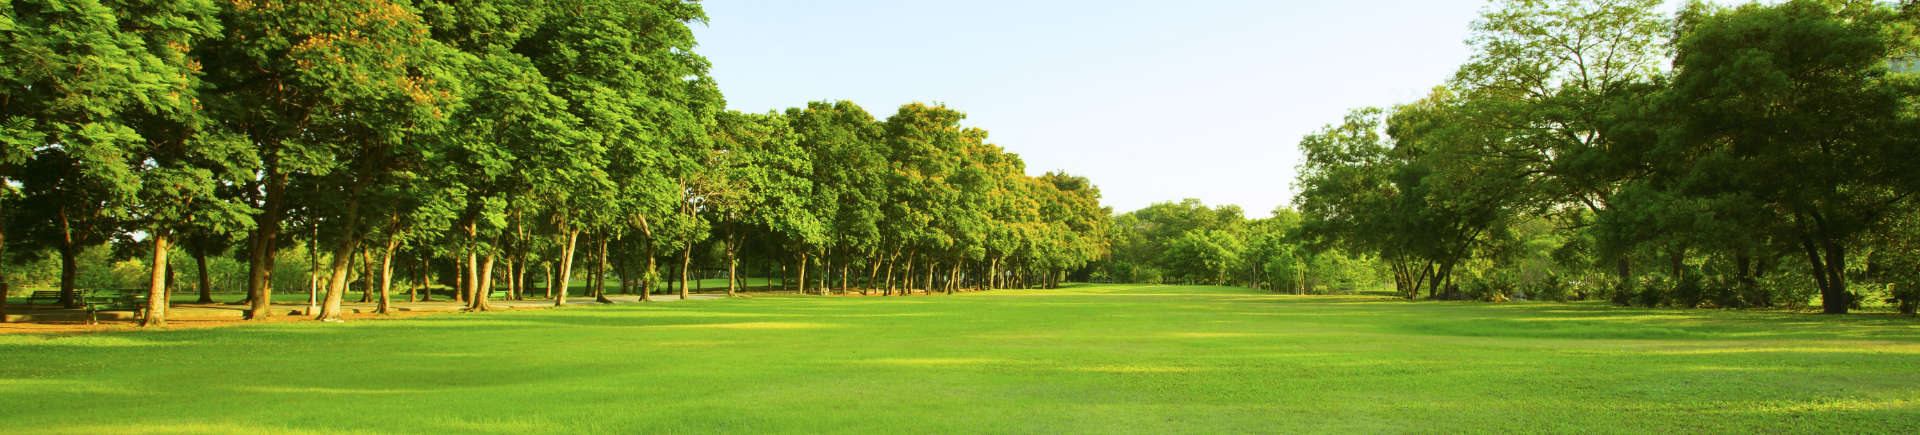 view of park lawn and trees in the bright morning light